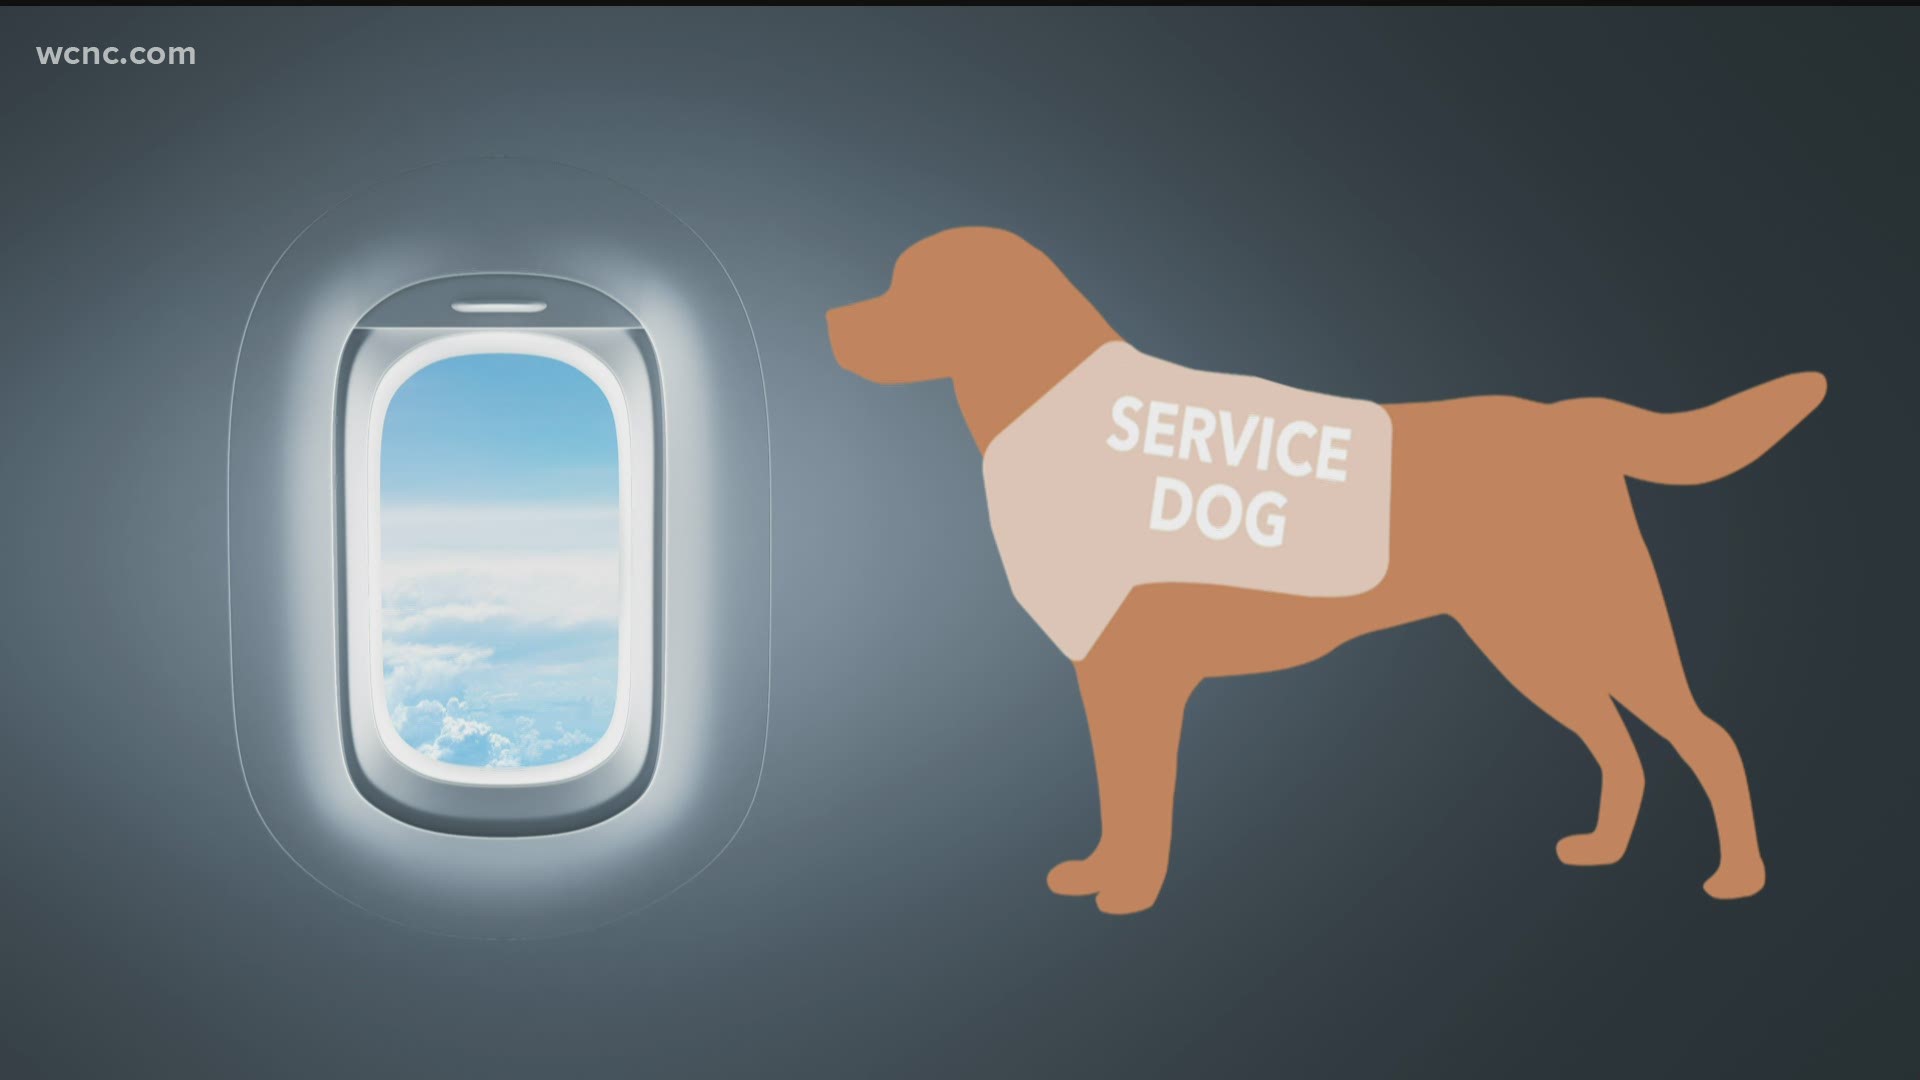 The Department of Transportation will only allow trained dogs inside the main cabin of planes.